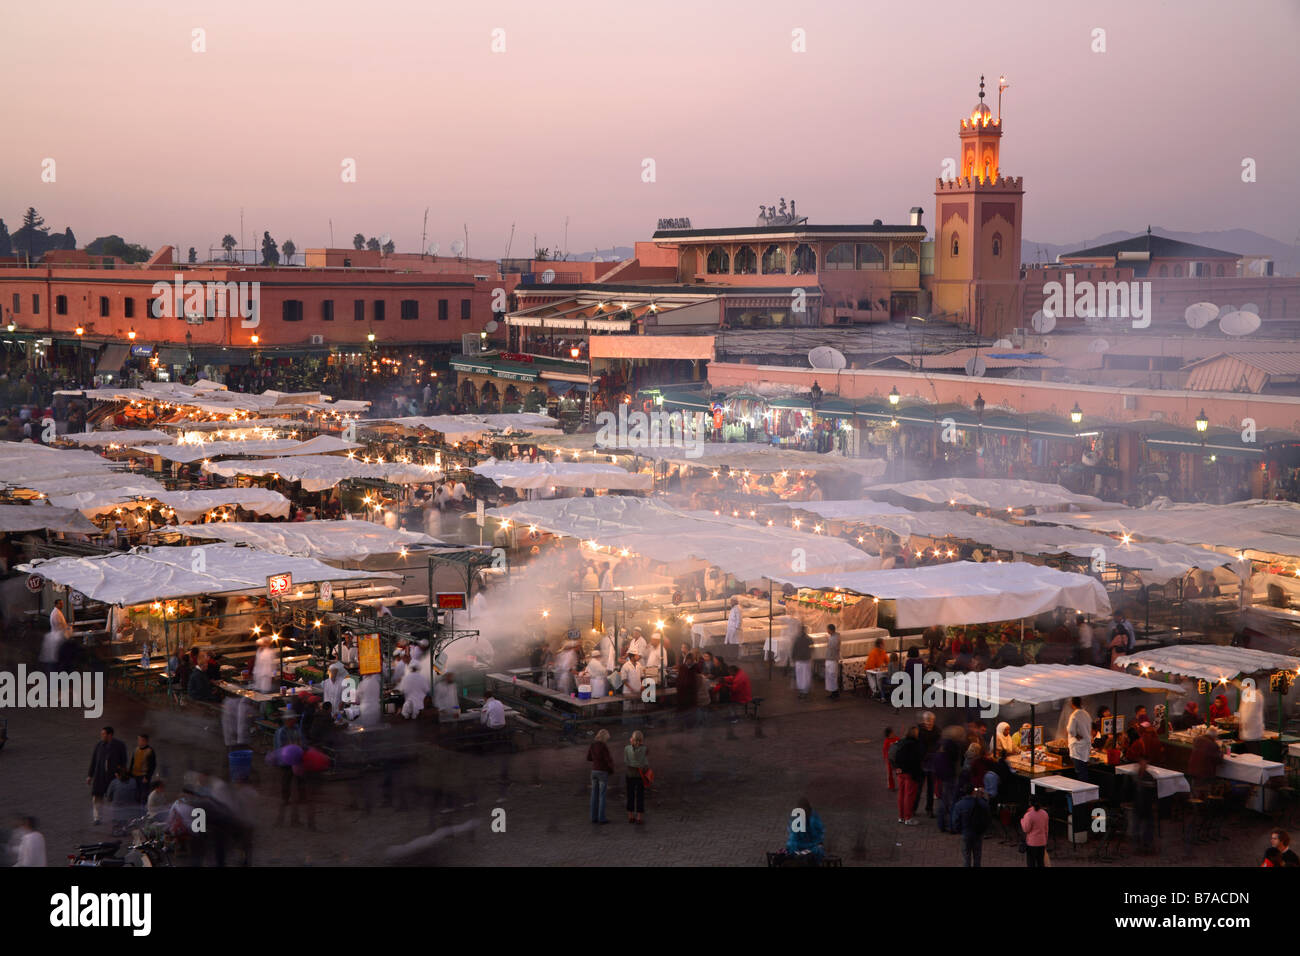 Djemaa el fna square at sunset, Marrakech, Morocco Stock Photo